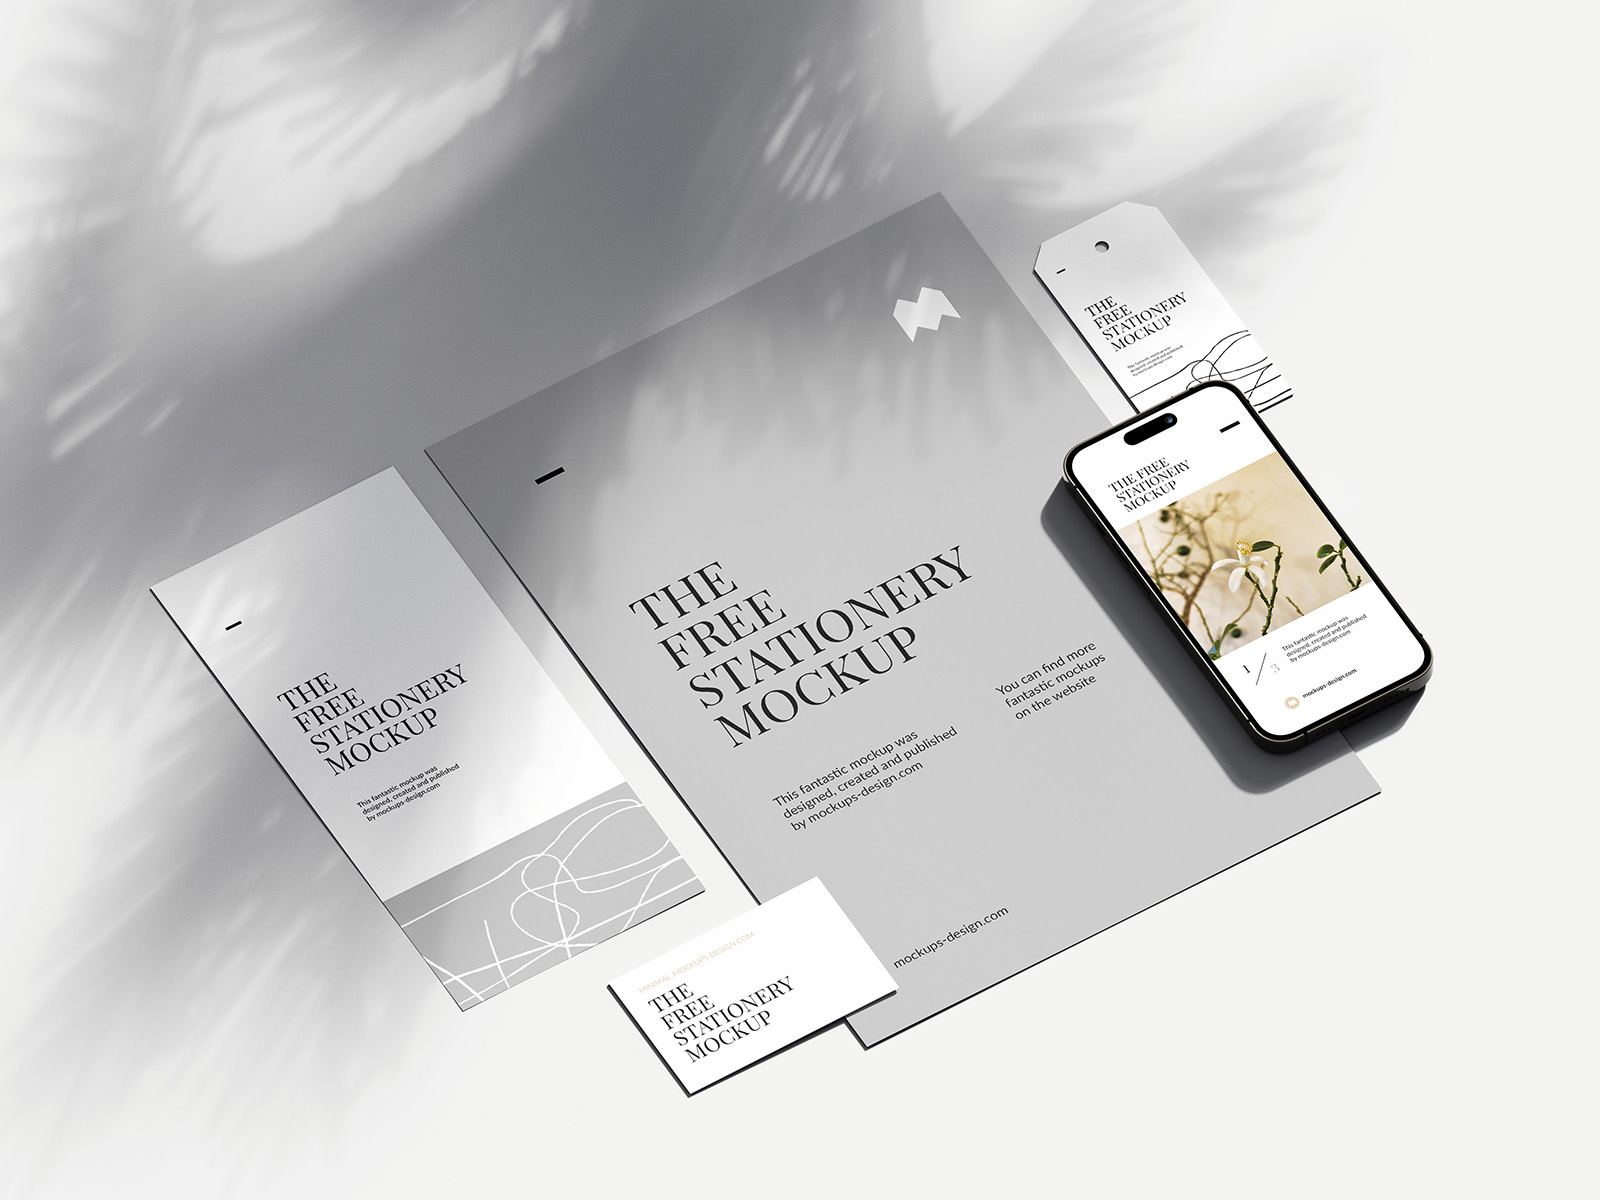 Clean stationery mockup with shadows